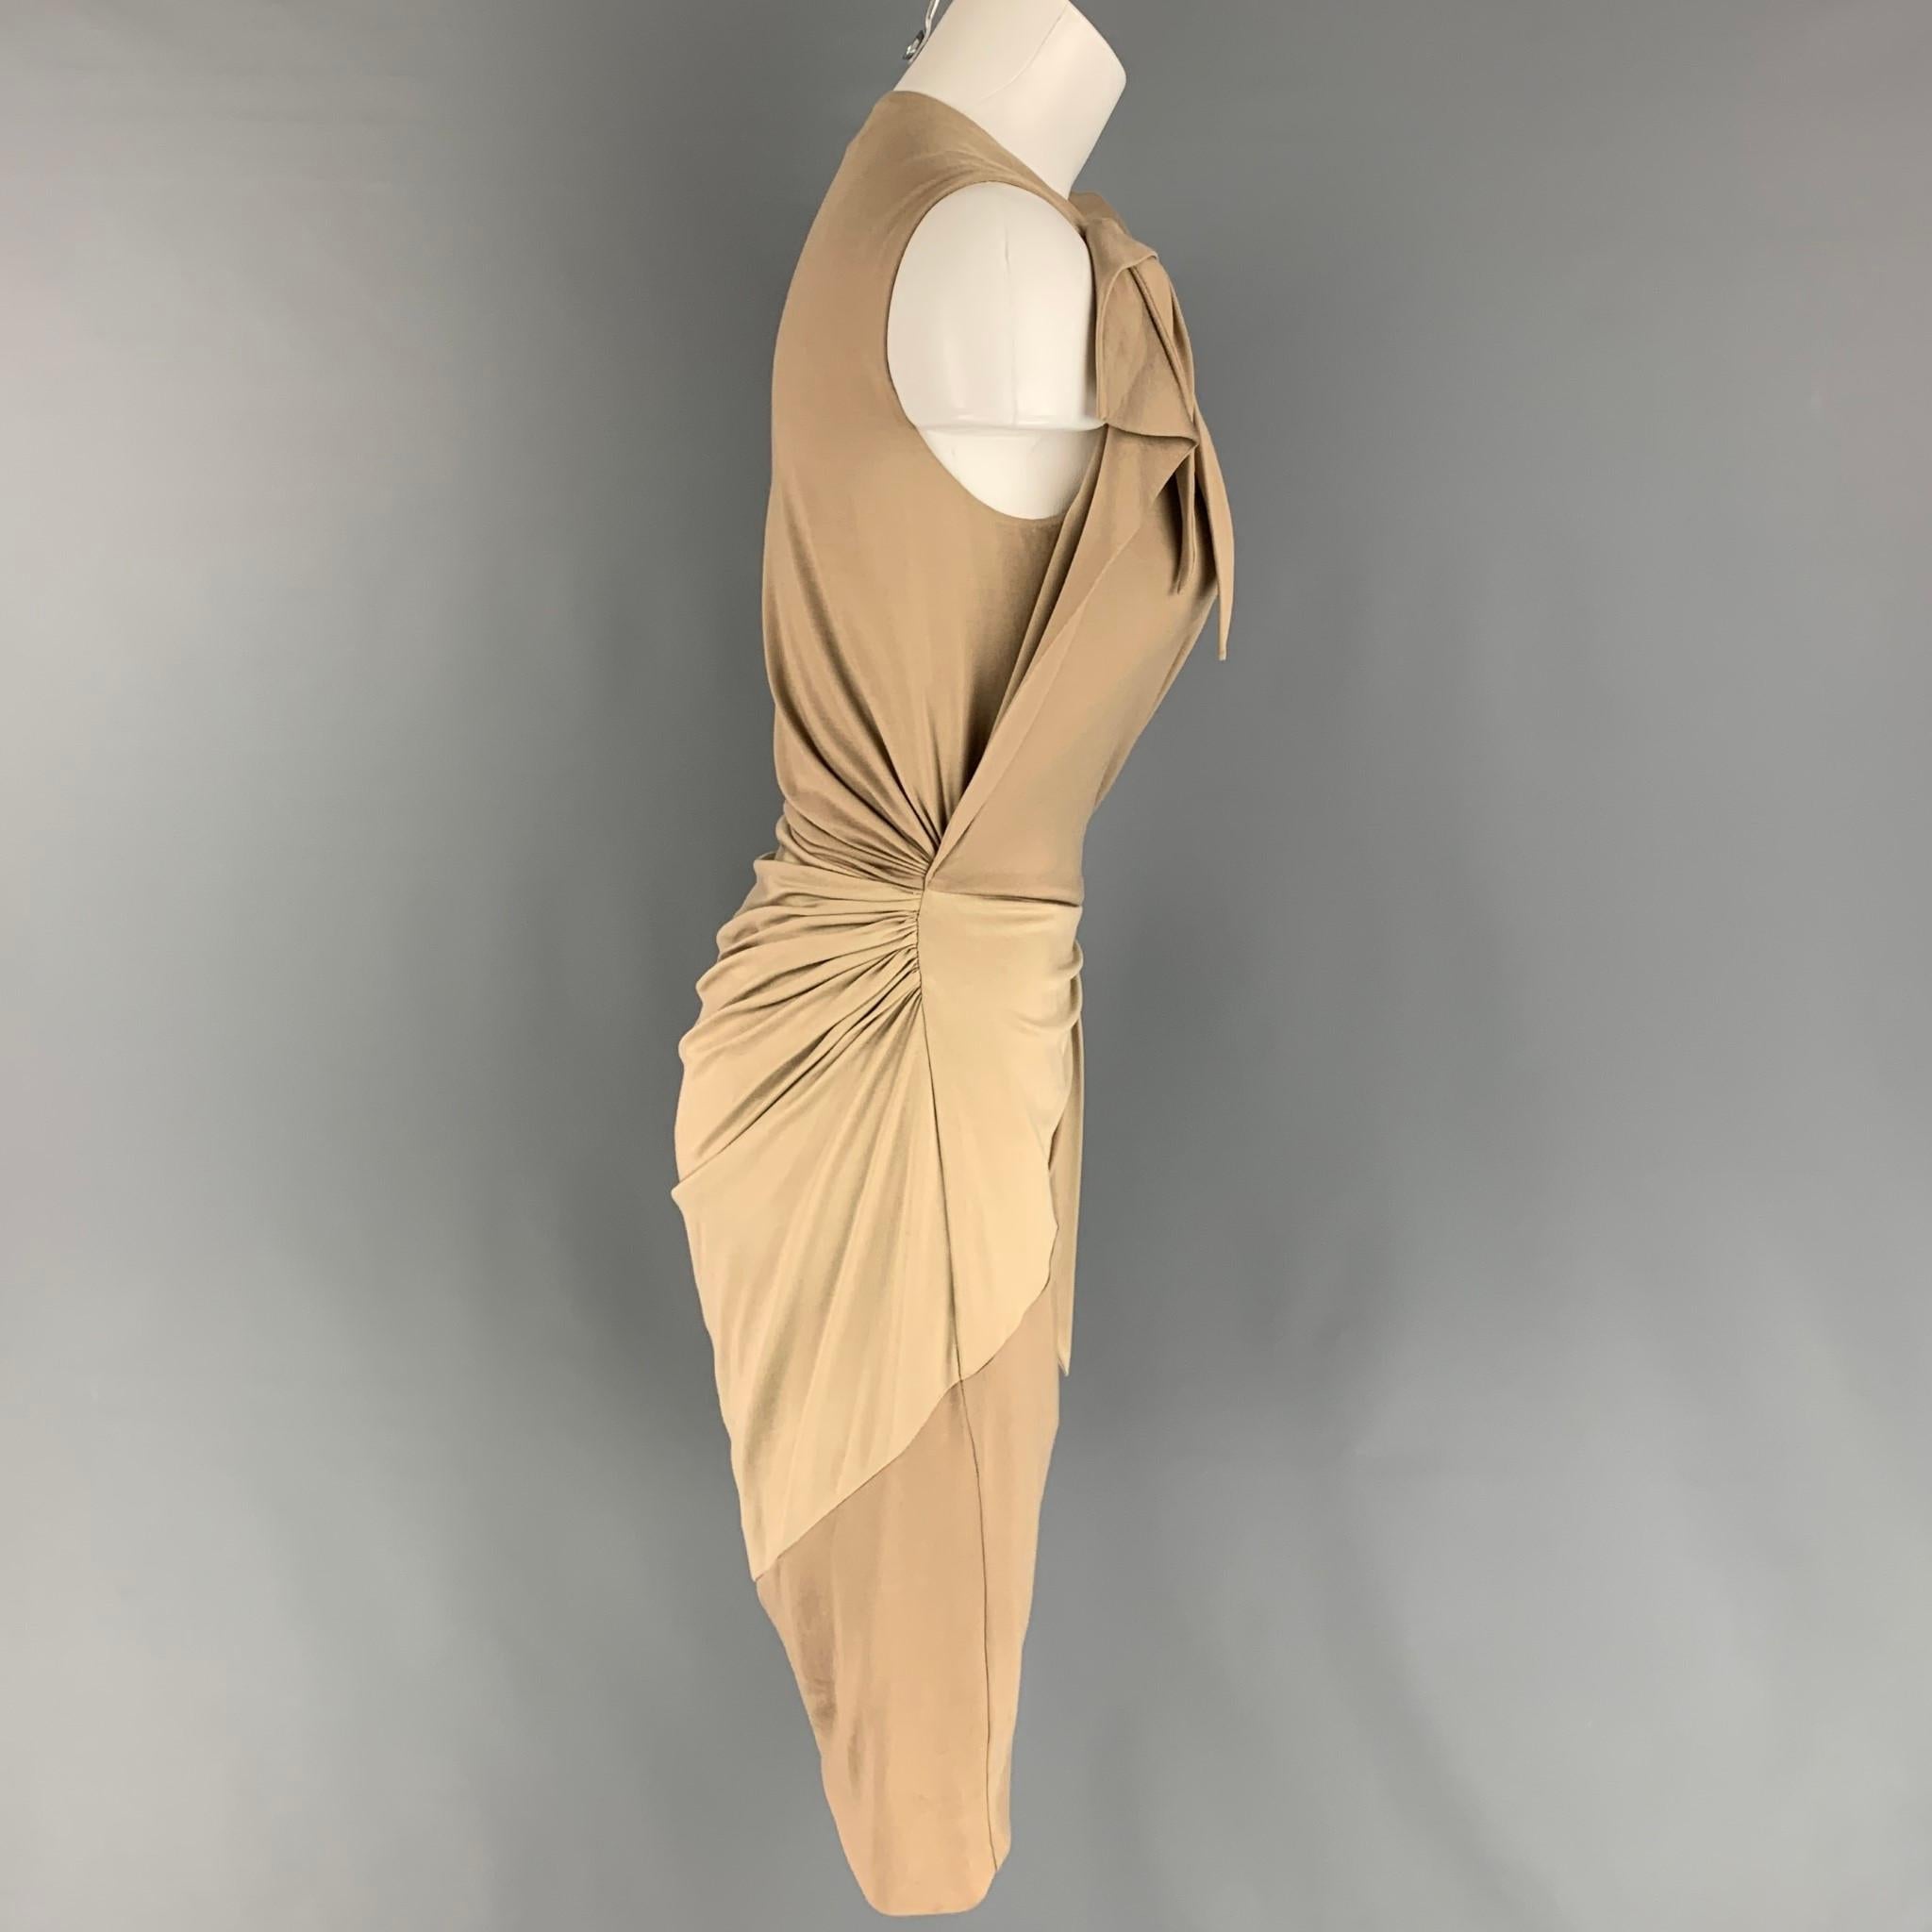 BURBERRY dress comes in a khaki stretch silk featuring a sheath style, gathered knot details, snap buttons, and a side zipper closure. Made in Italy. 

Very Good Pre-Owned Condition.
Marked: UK 8 / US 6 / IT 40
Original Retail Price: